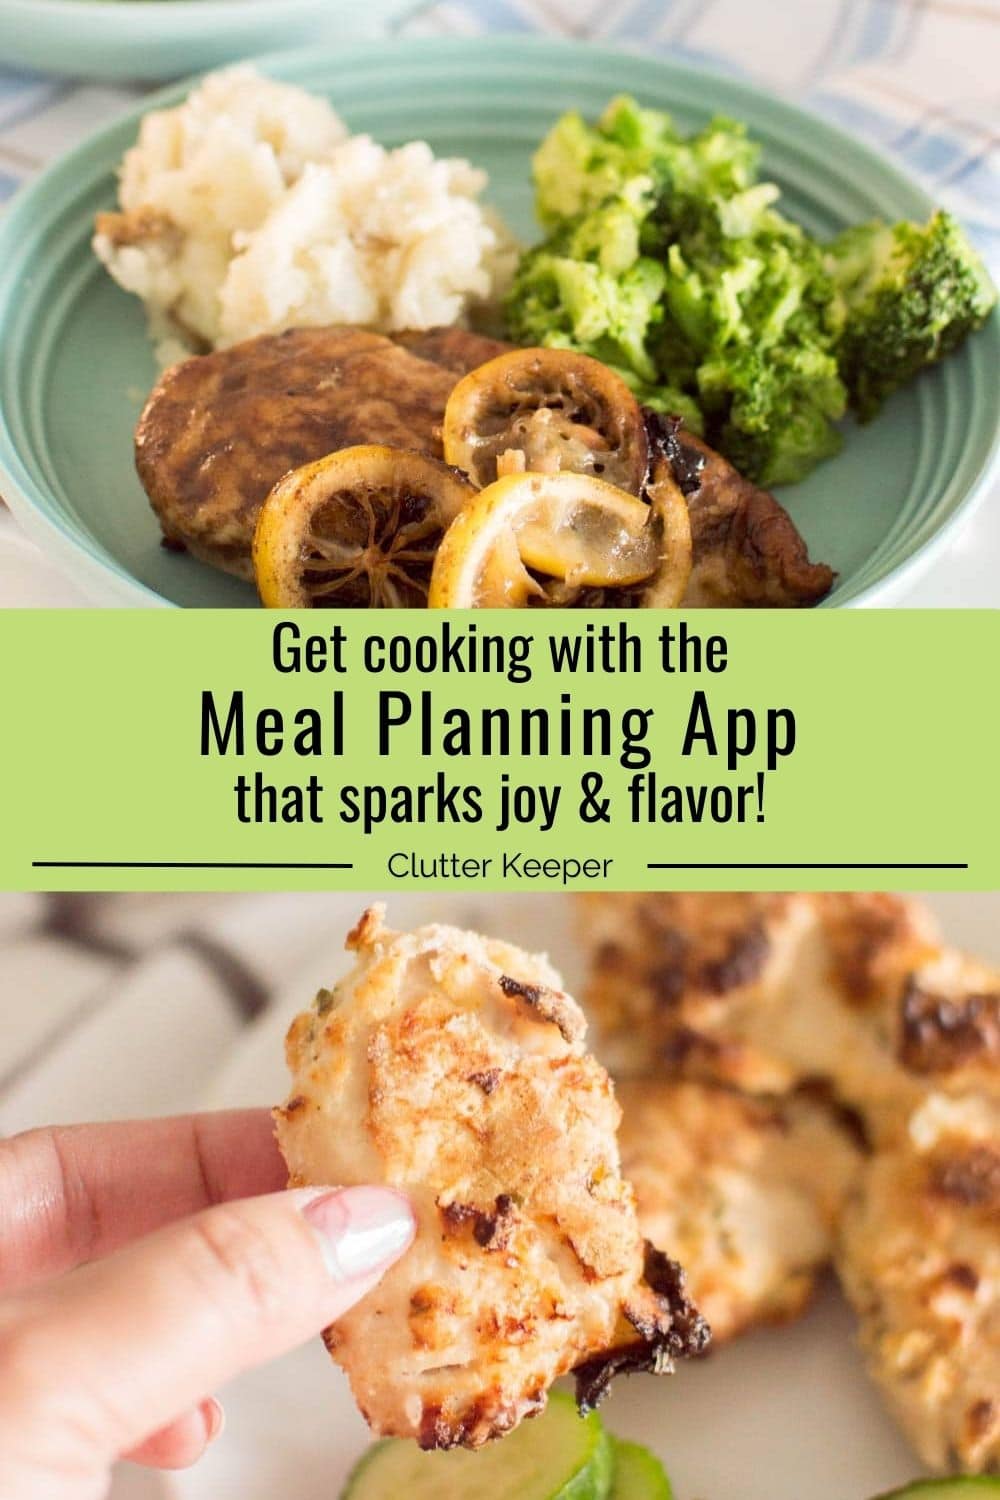 Get cooking with the meal planning app that sparks joy and flavor.